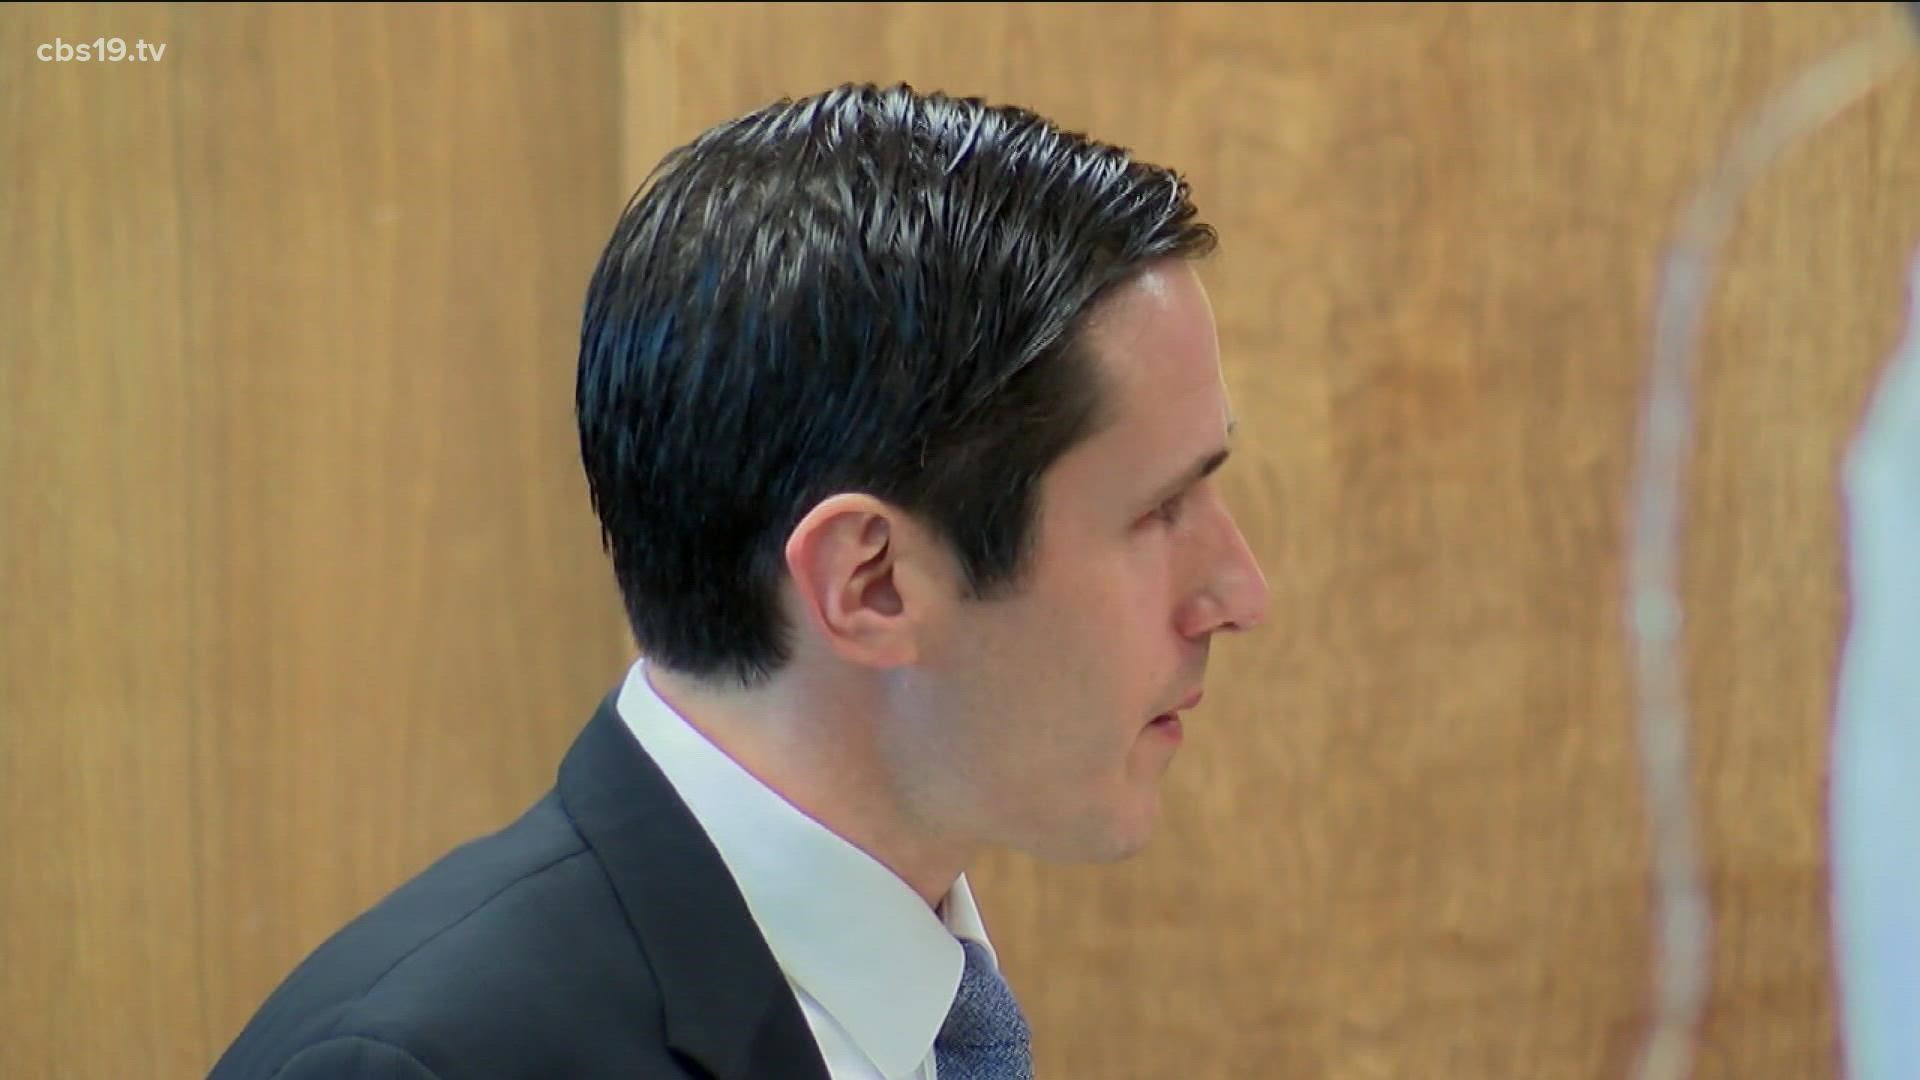 Capital Murder trial for William Davis, nurse accused of killing 4 patients in East Texas hospital, officially underway